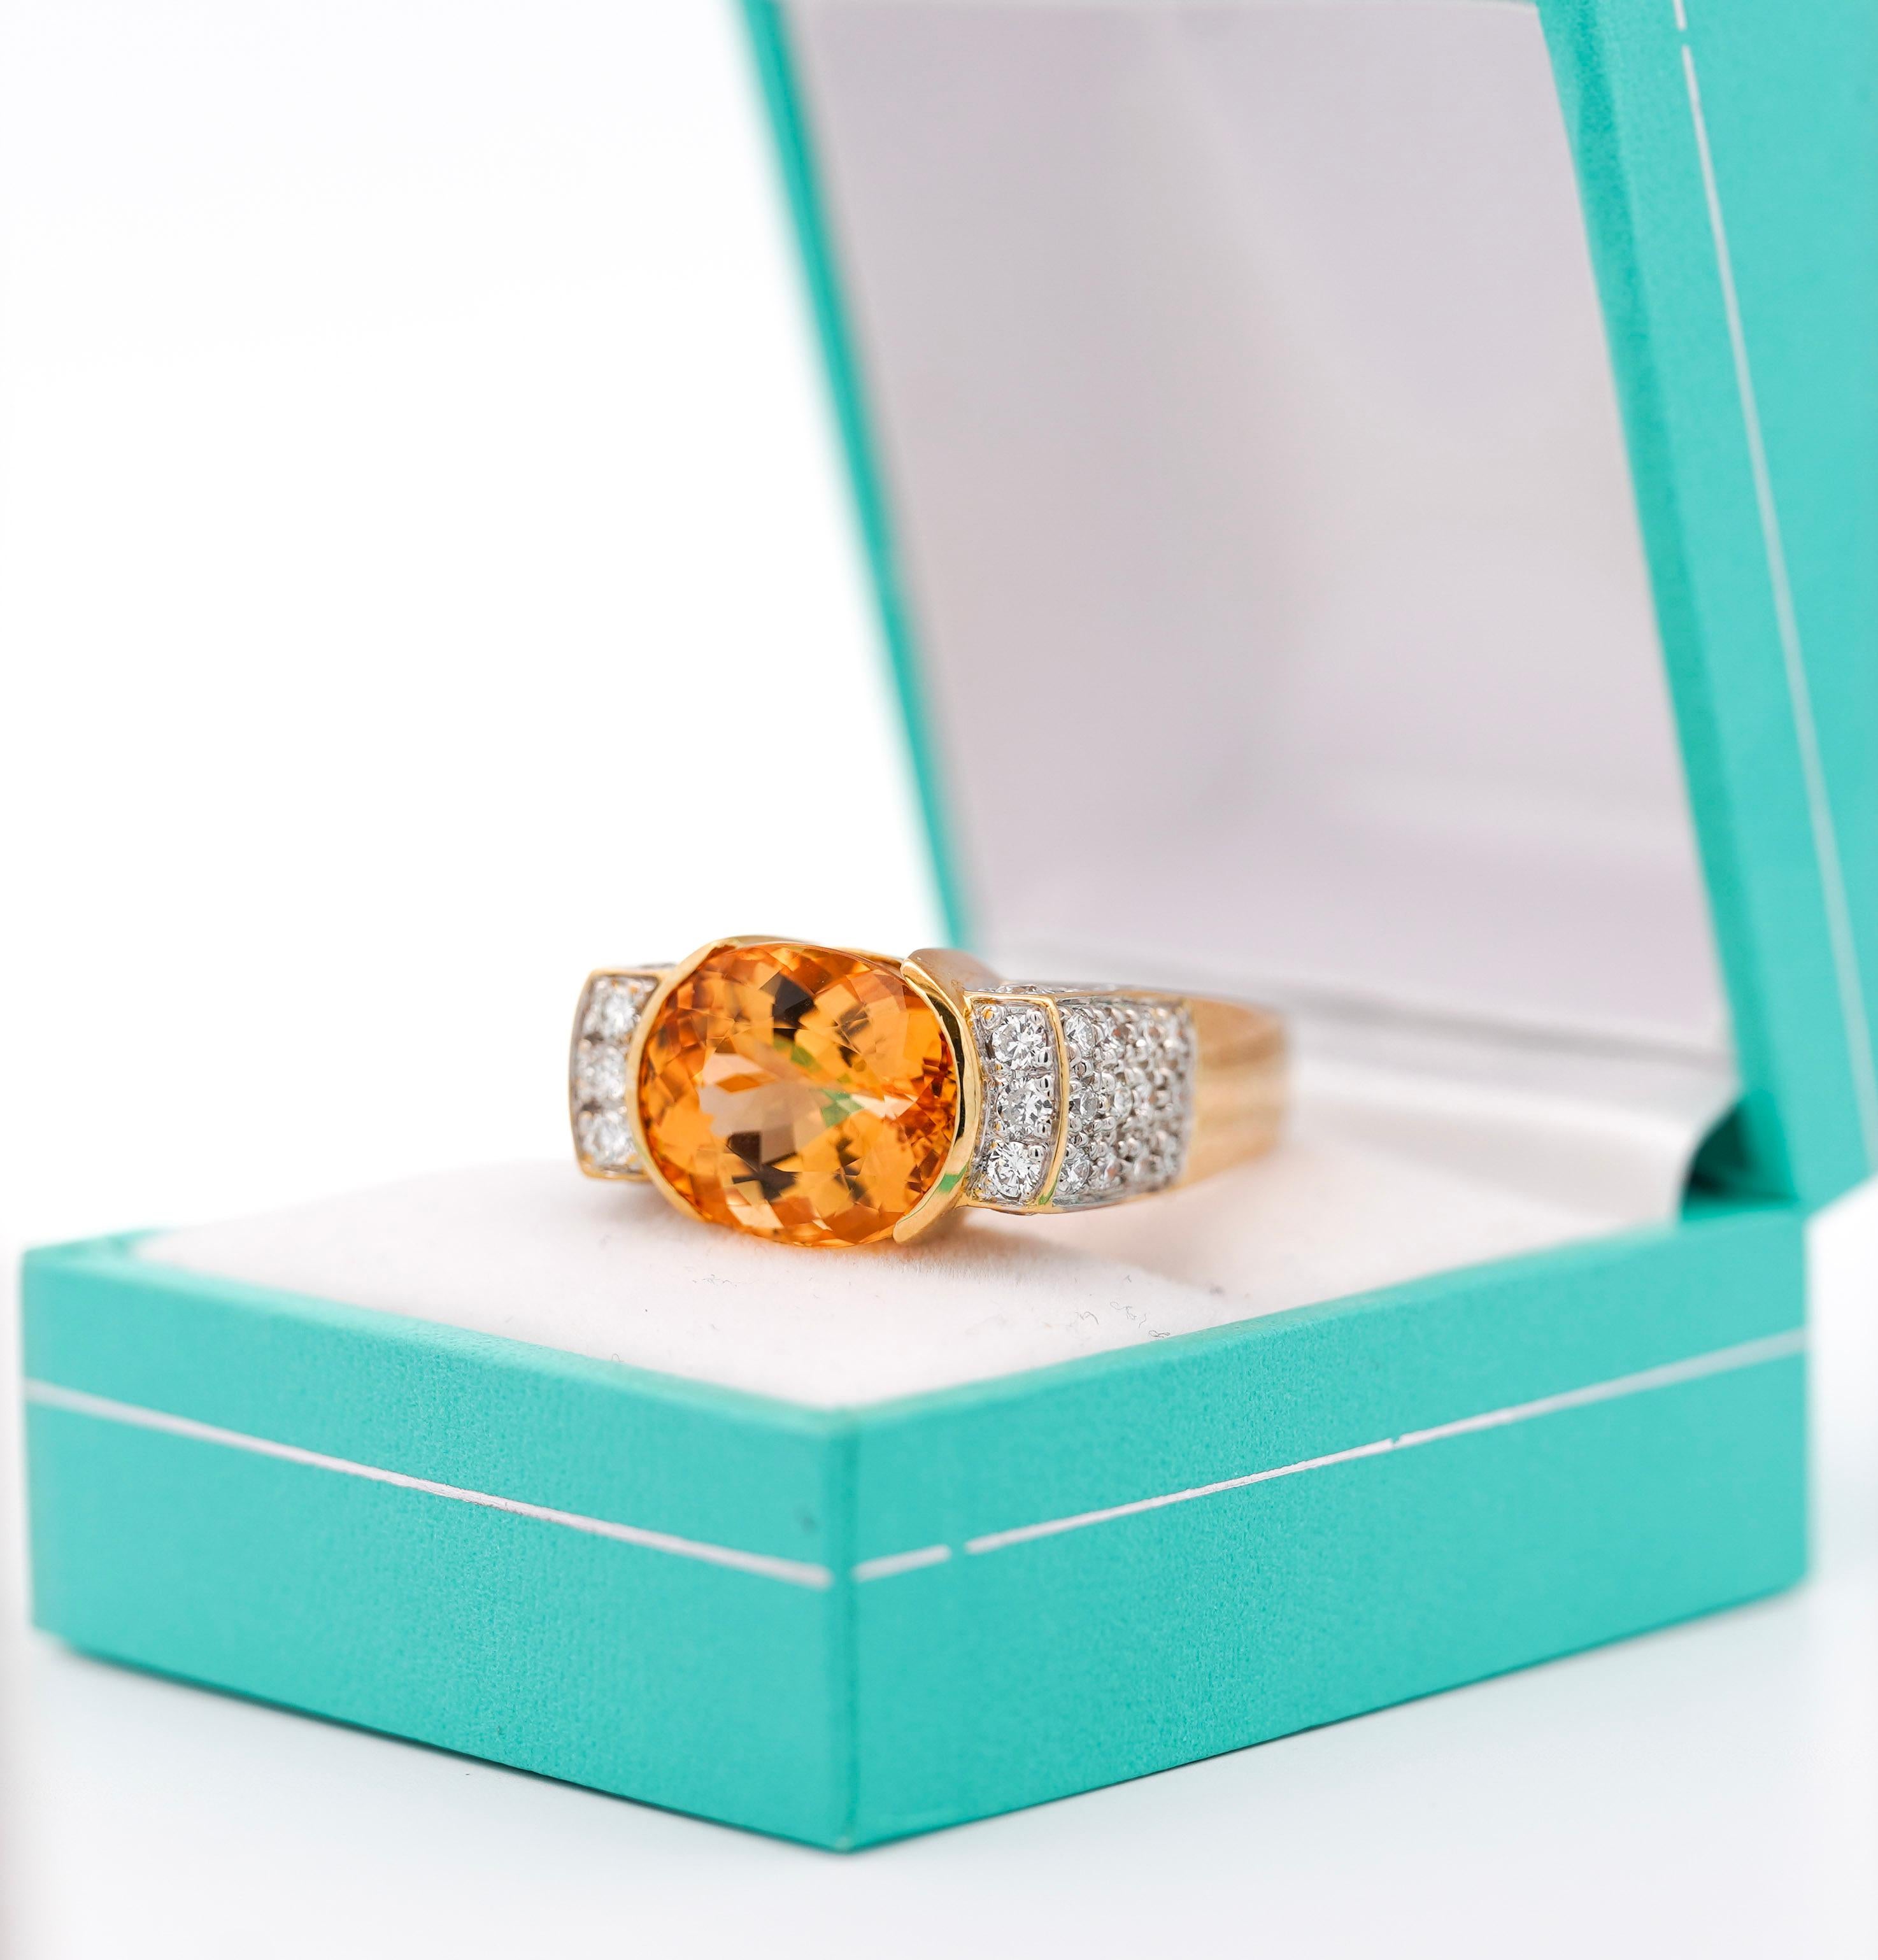 GIA certified vintage geometric Natural Orange Topaz and Diamond Ring, set in 18K Yellow Gold.

This lovely cocktail ring boasts a brilliant oval-cut orange topaz center stone in half bezel setting, and round-cut diamond side stones. This ring is